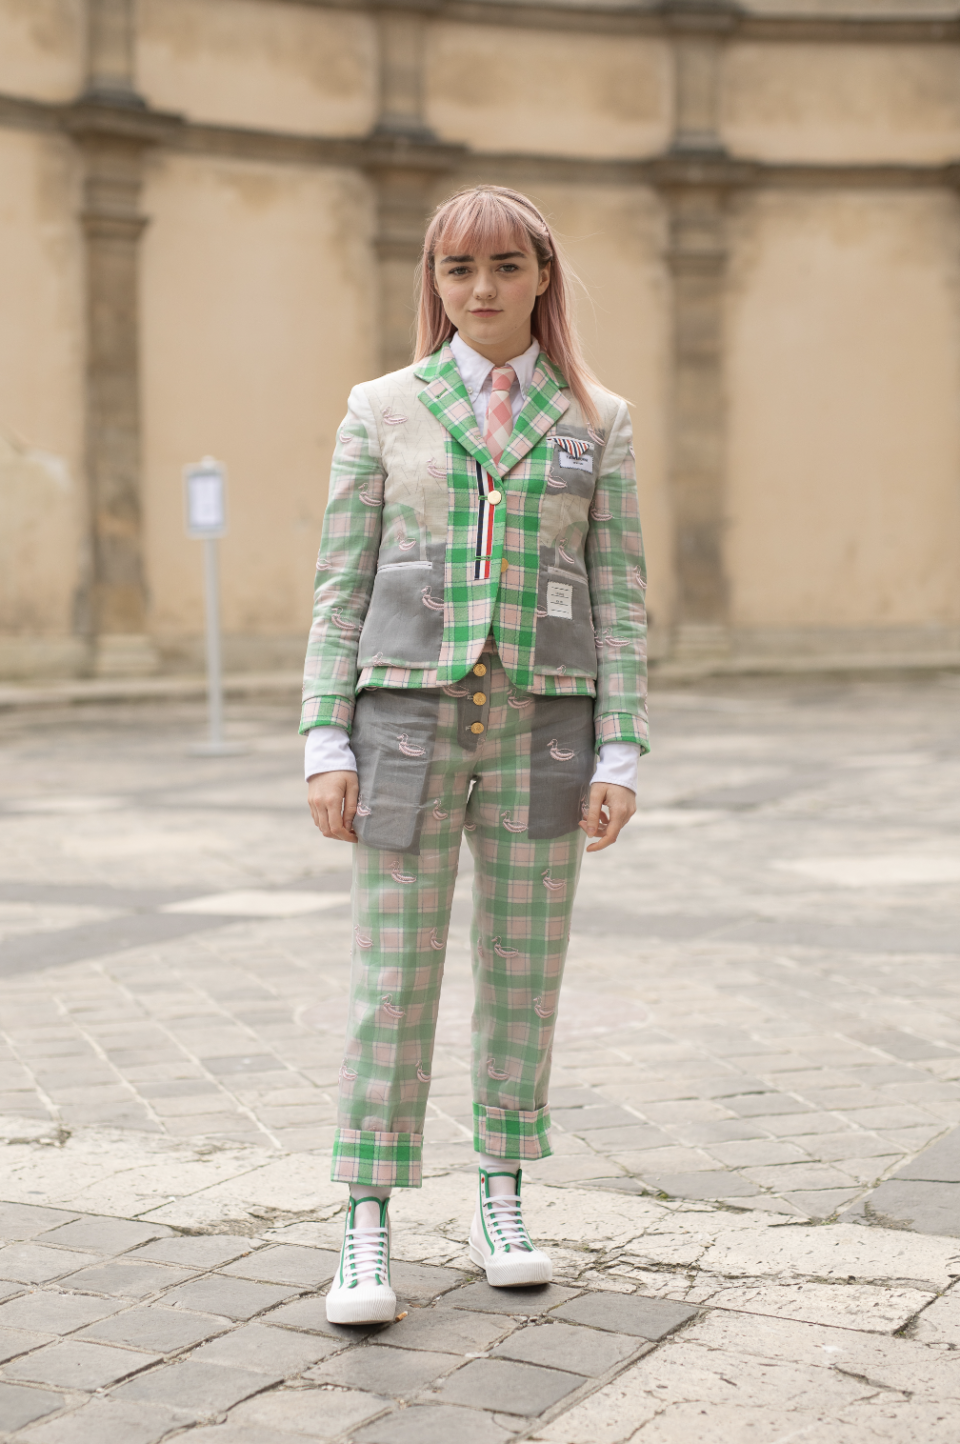 Maisie Williams at the Thom Browne AW19 show